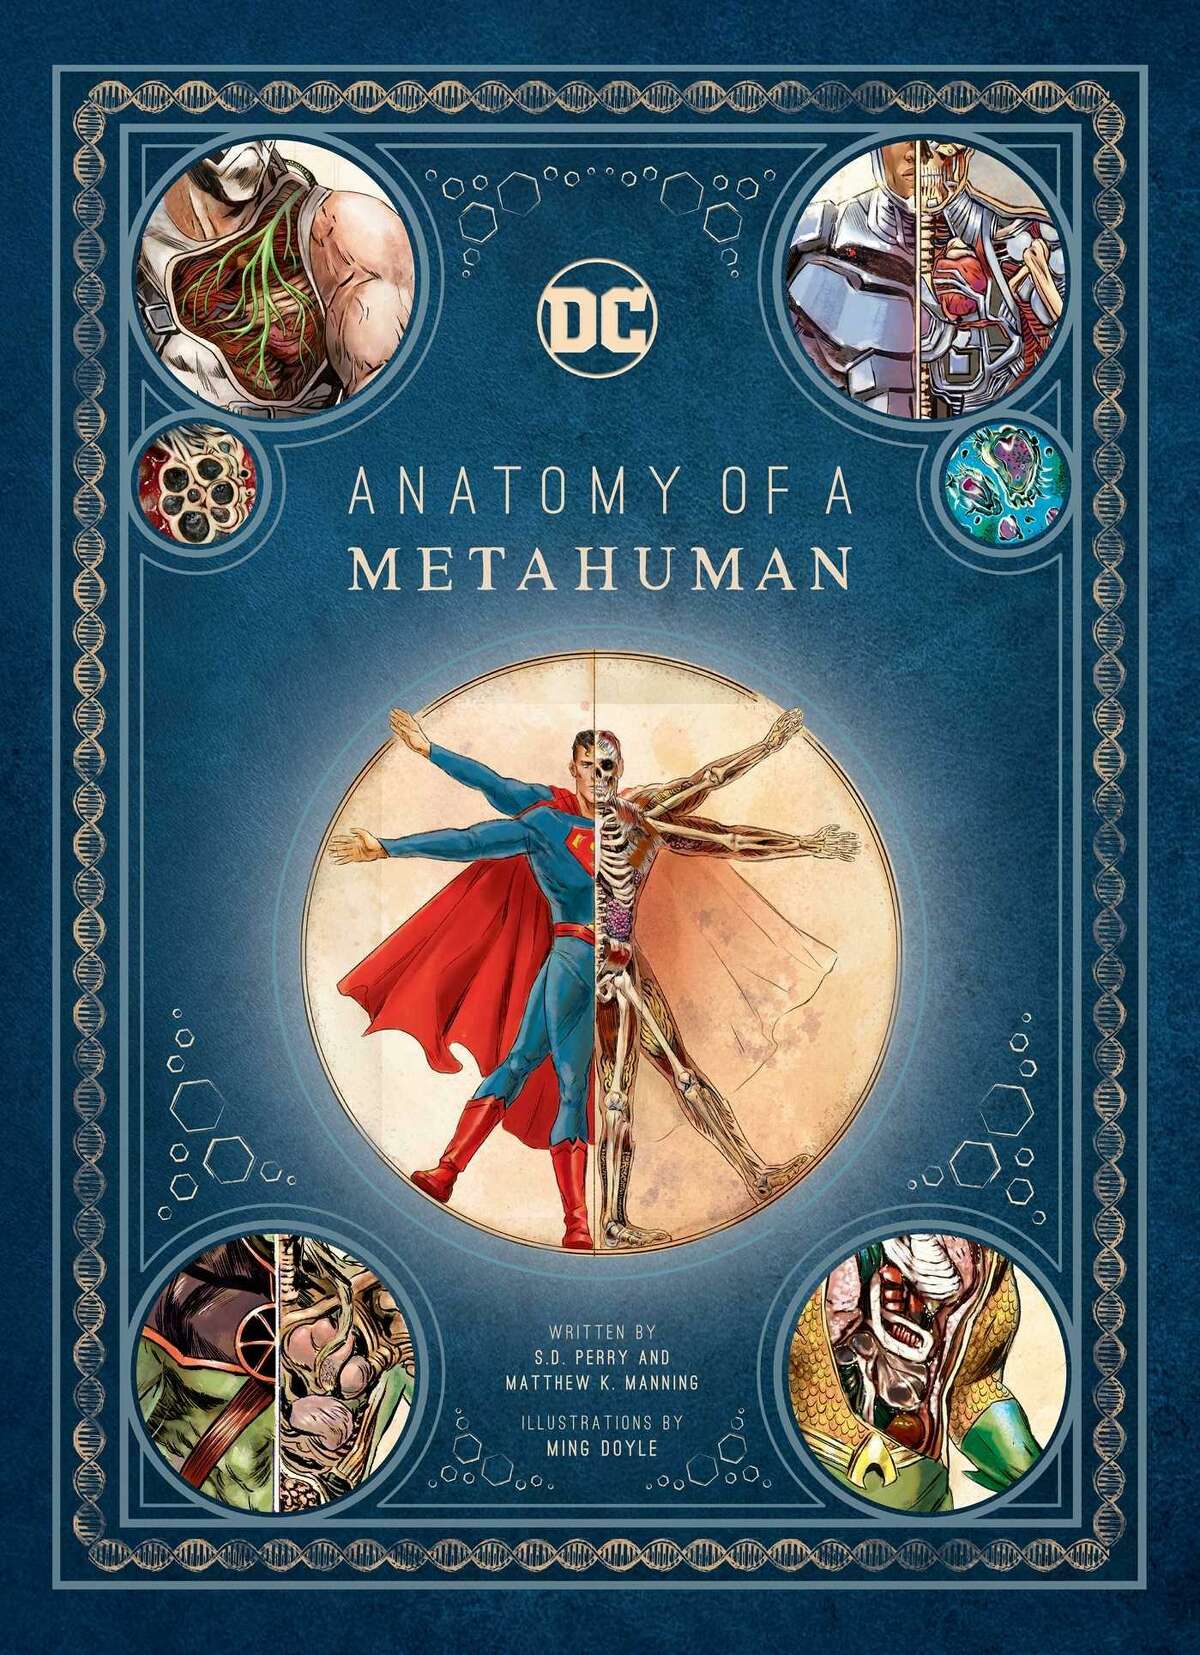 “Anatomy of a Metahuman,” by S.D. Perry and Matthew K. Manning